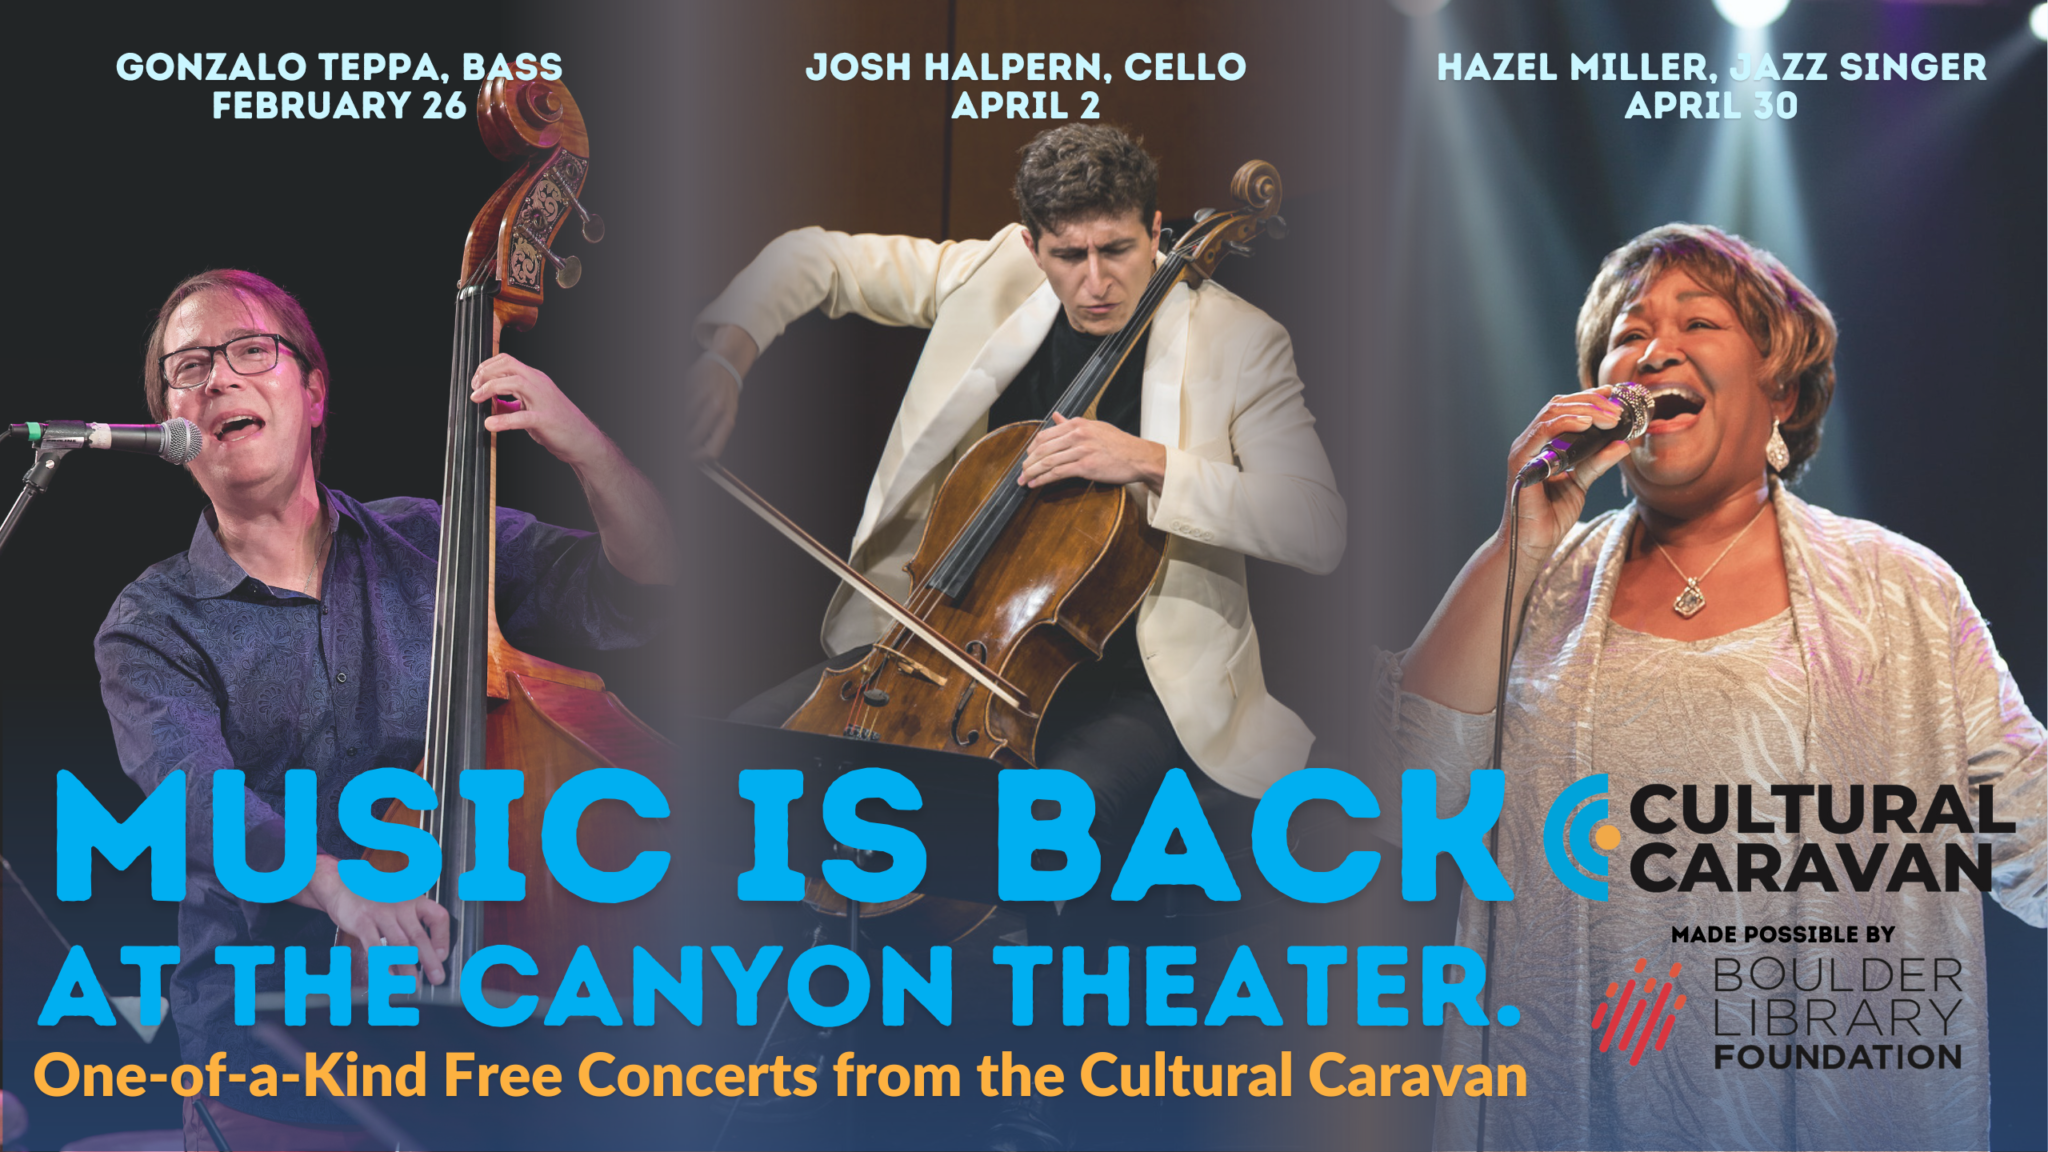 The Cultural Caravan brings great music to the Canyon Theater stage in 2023!